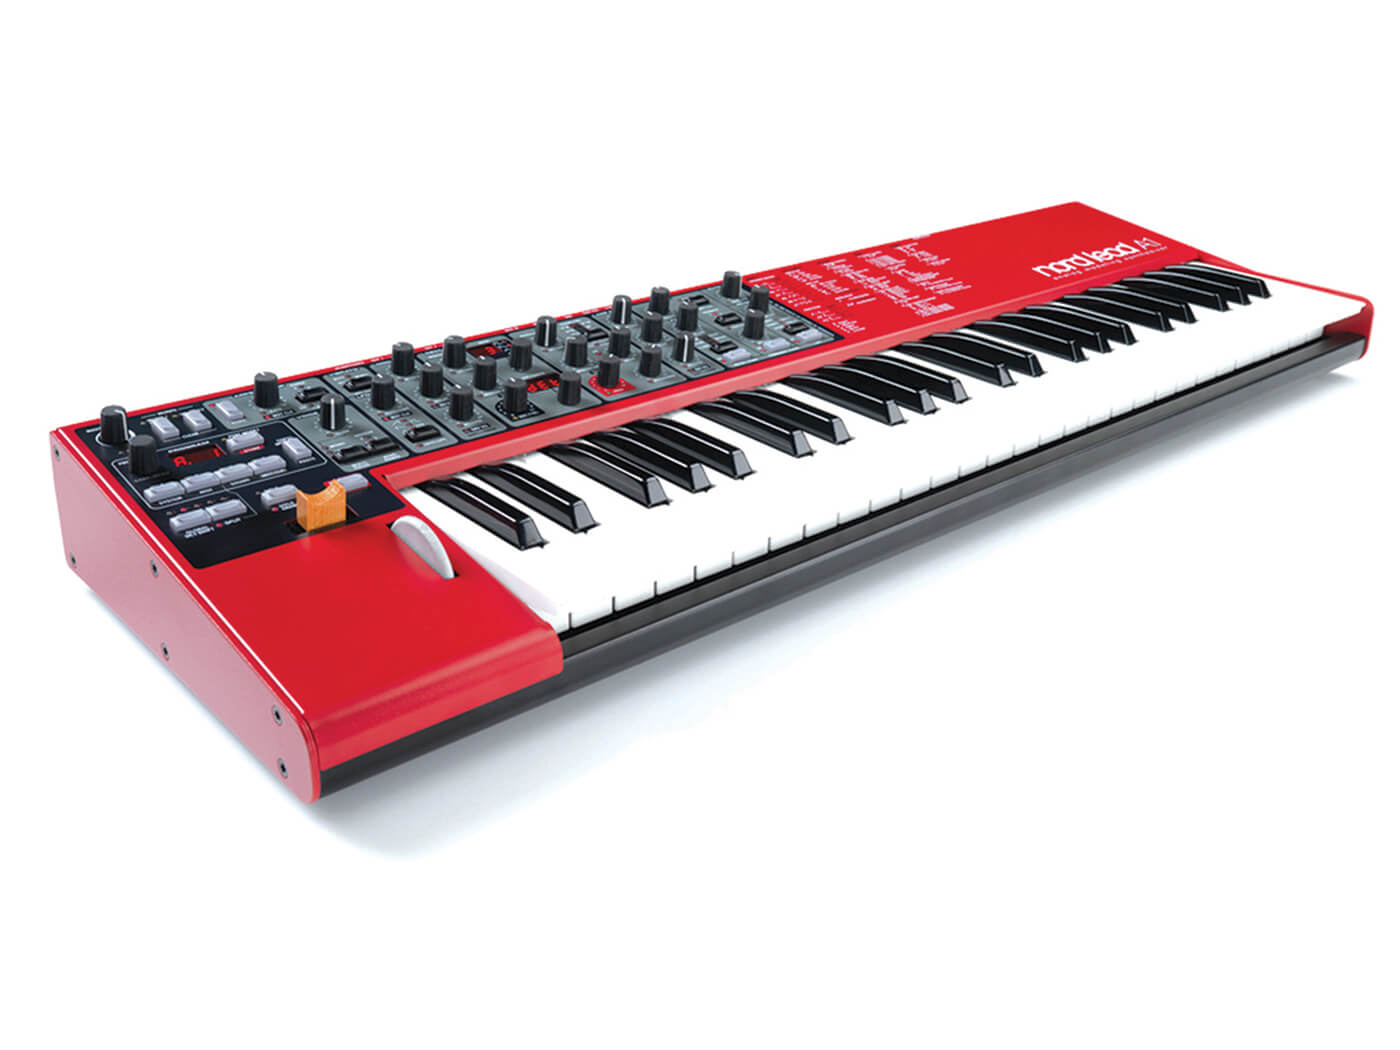 Nord Lead Synthesizer, sound synthesis